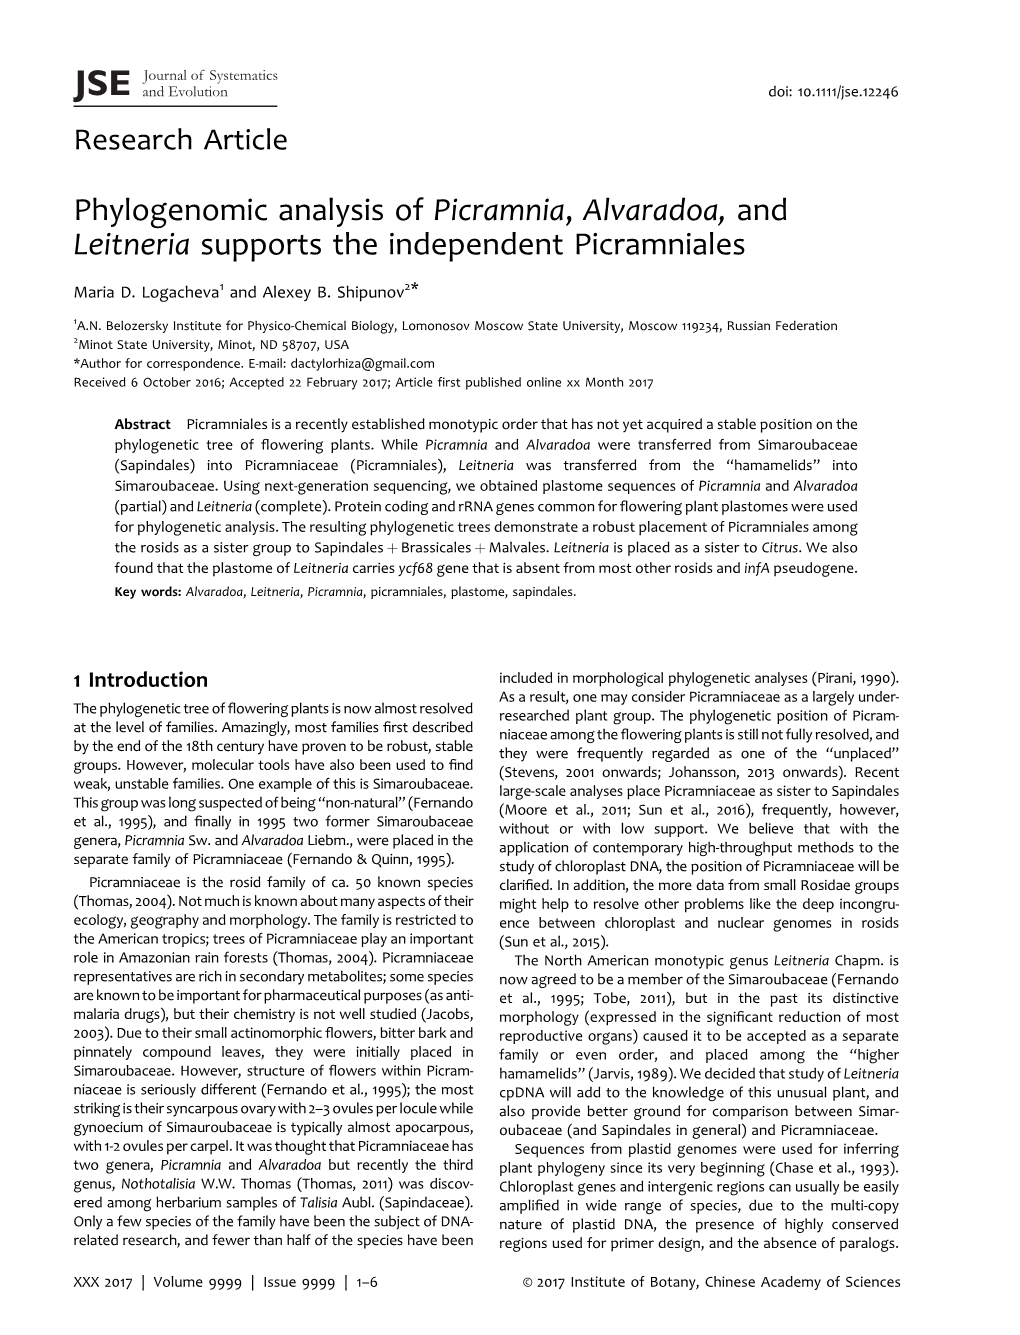 Phylogenomic Analysis of Picramnia, Alvaradoa, and Leitneria Supports the Independent Picramniales